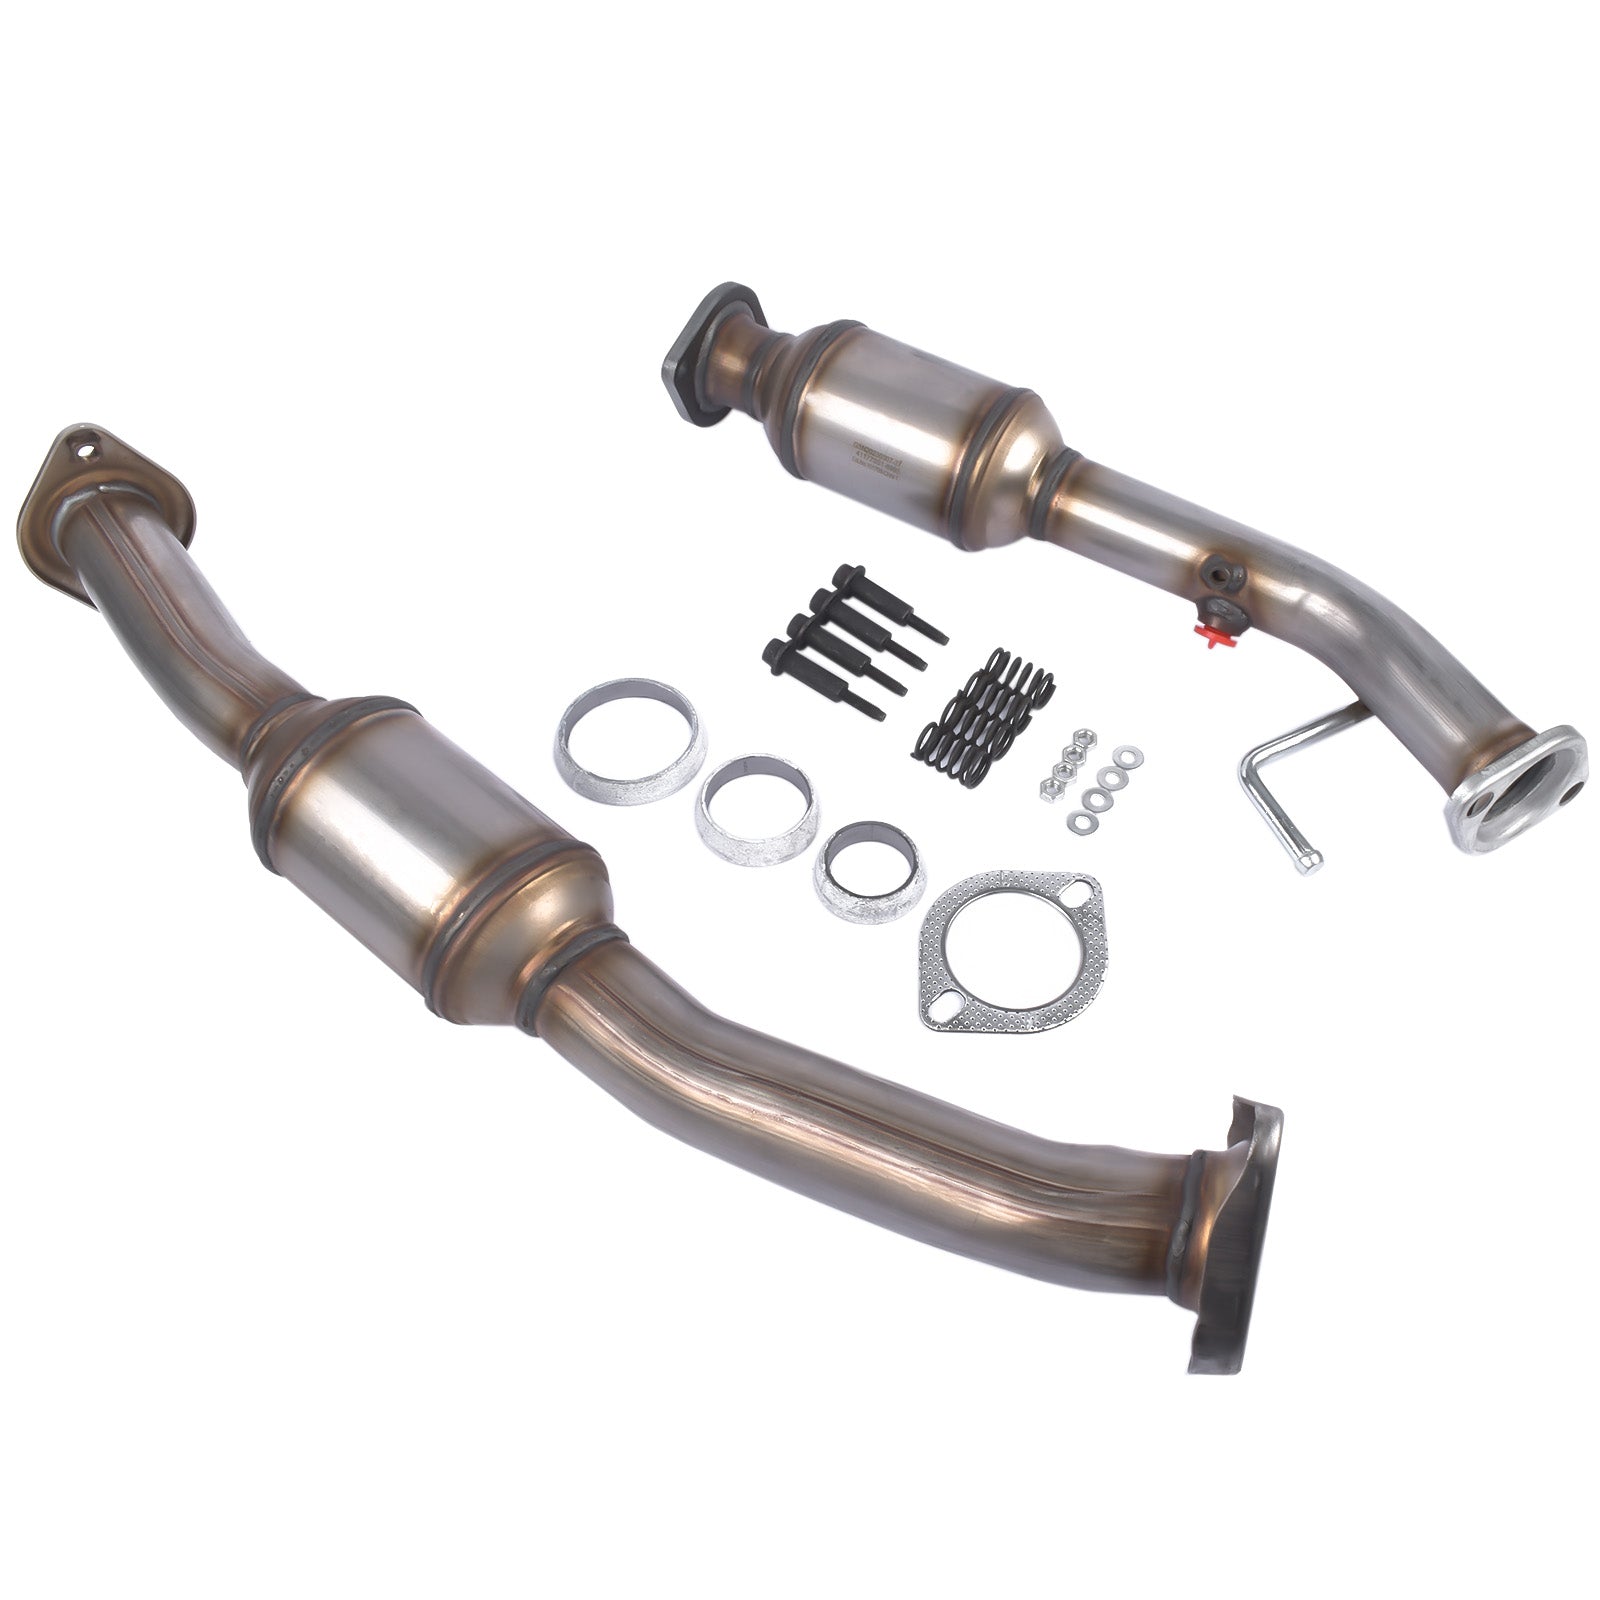 ZNTS 2x Front & Rear Catalytic Converters Fit Nissan NV200 2013-2019 EPA OBD-II Approved 8H41165 75393578